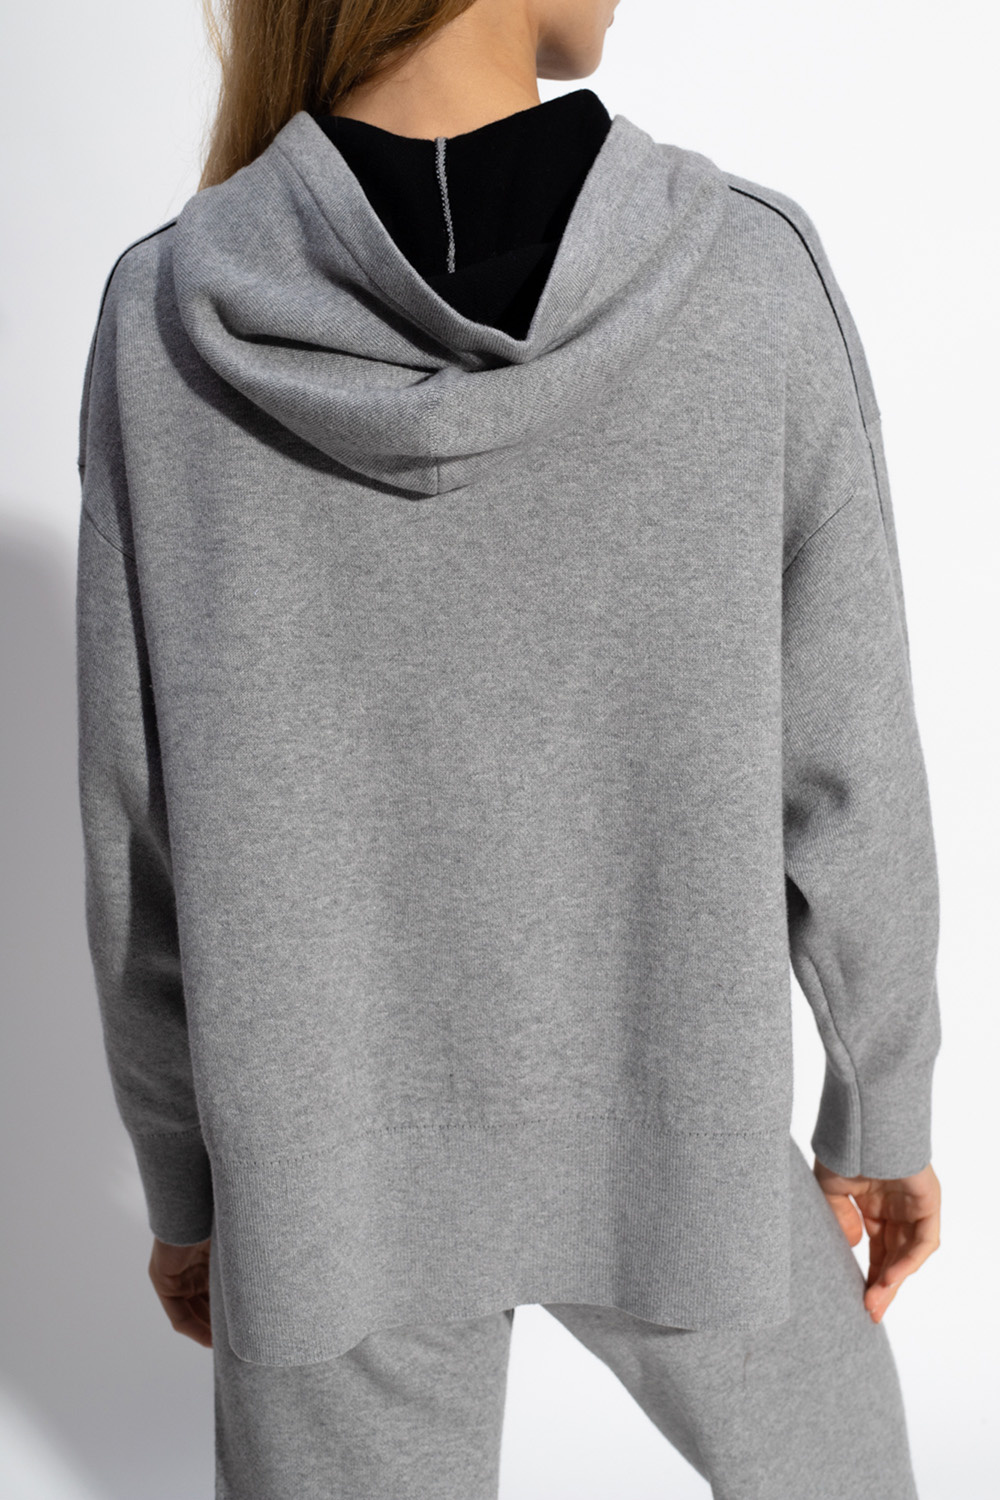 PROENZA SCHOULER WHITE LABEL TOP WITH ANIMAL MOTIF Hooded sweater